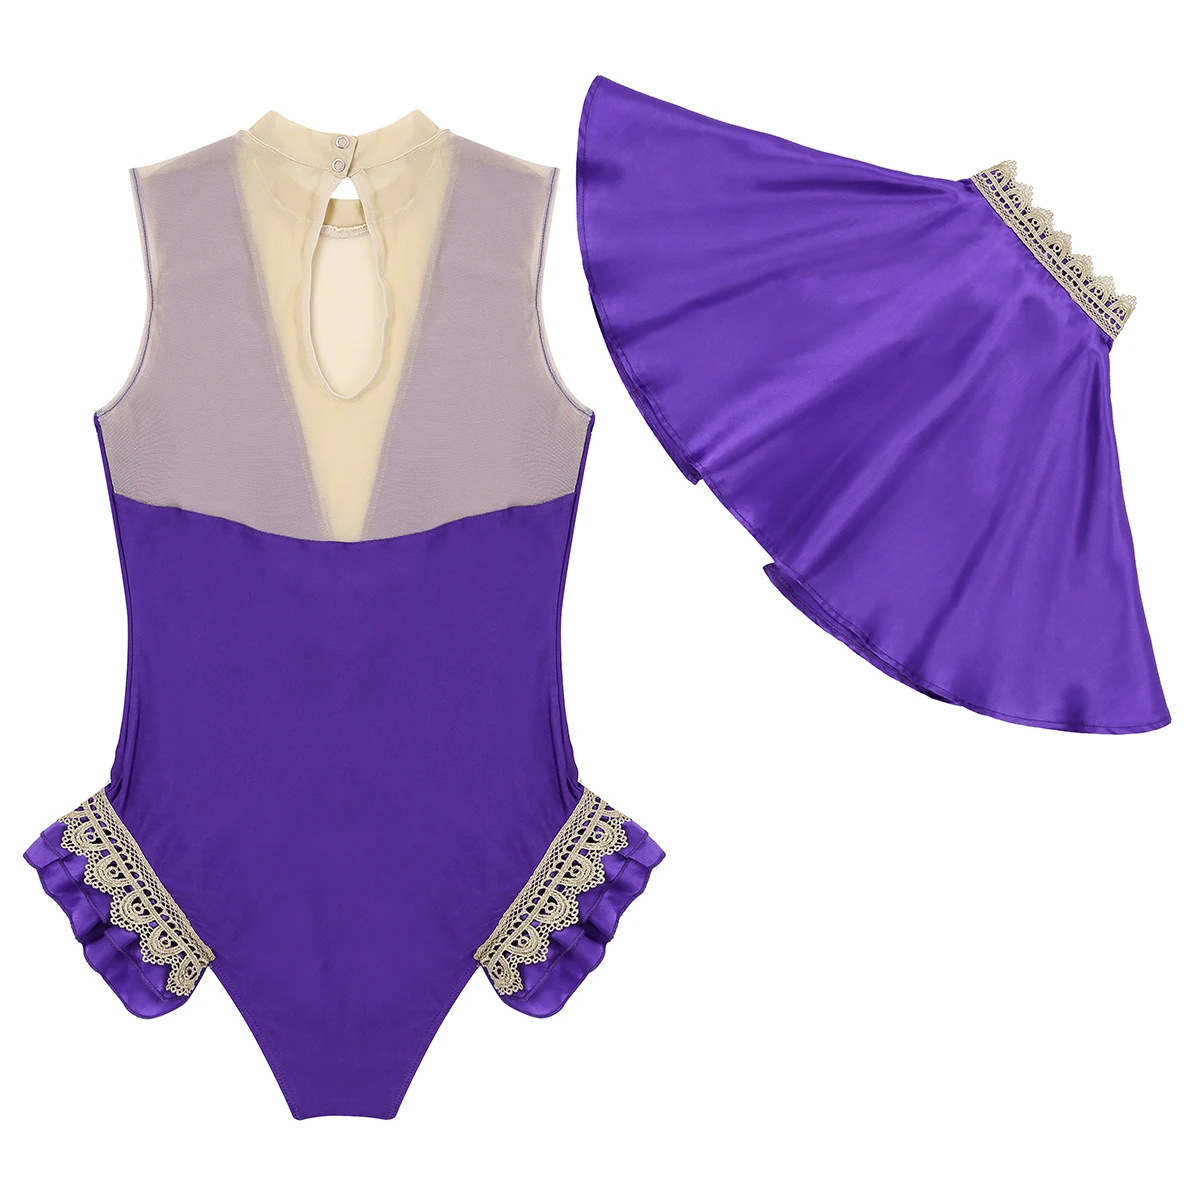 Vibrance' Sleeveless Deluxe Gymnastics Leotards Competition Gym